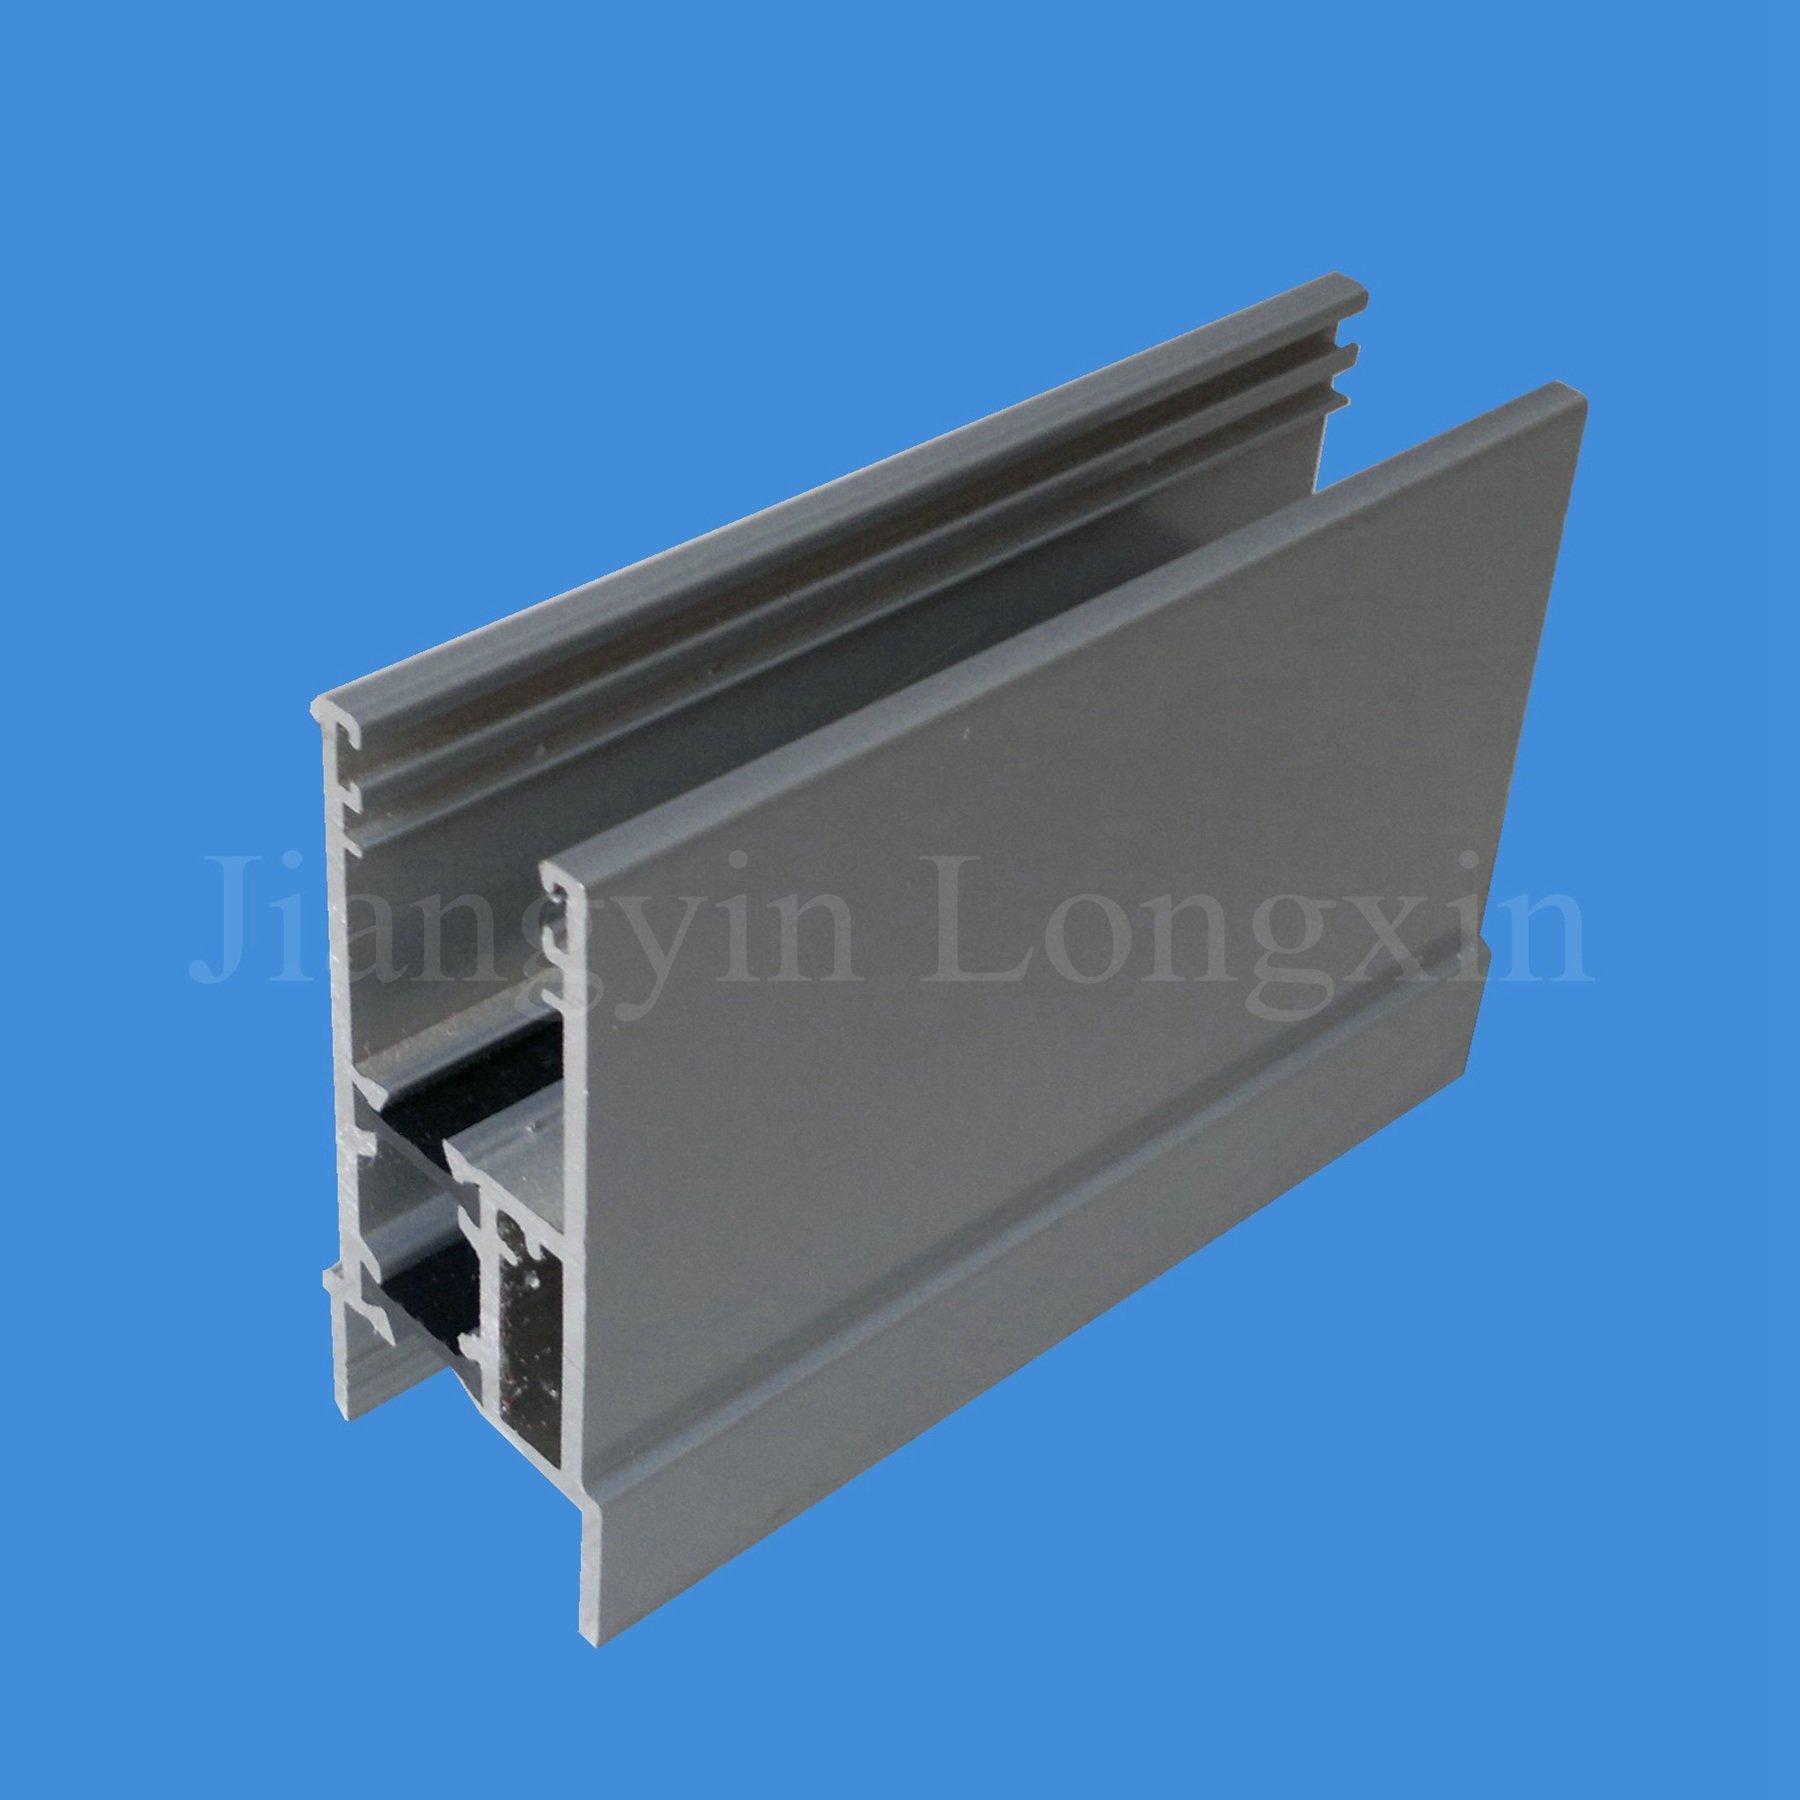 Grey Coated Aluminum Extrusion for Windows, Thermal Break